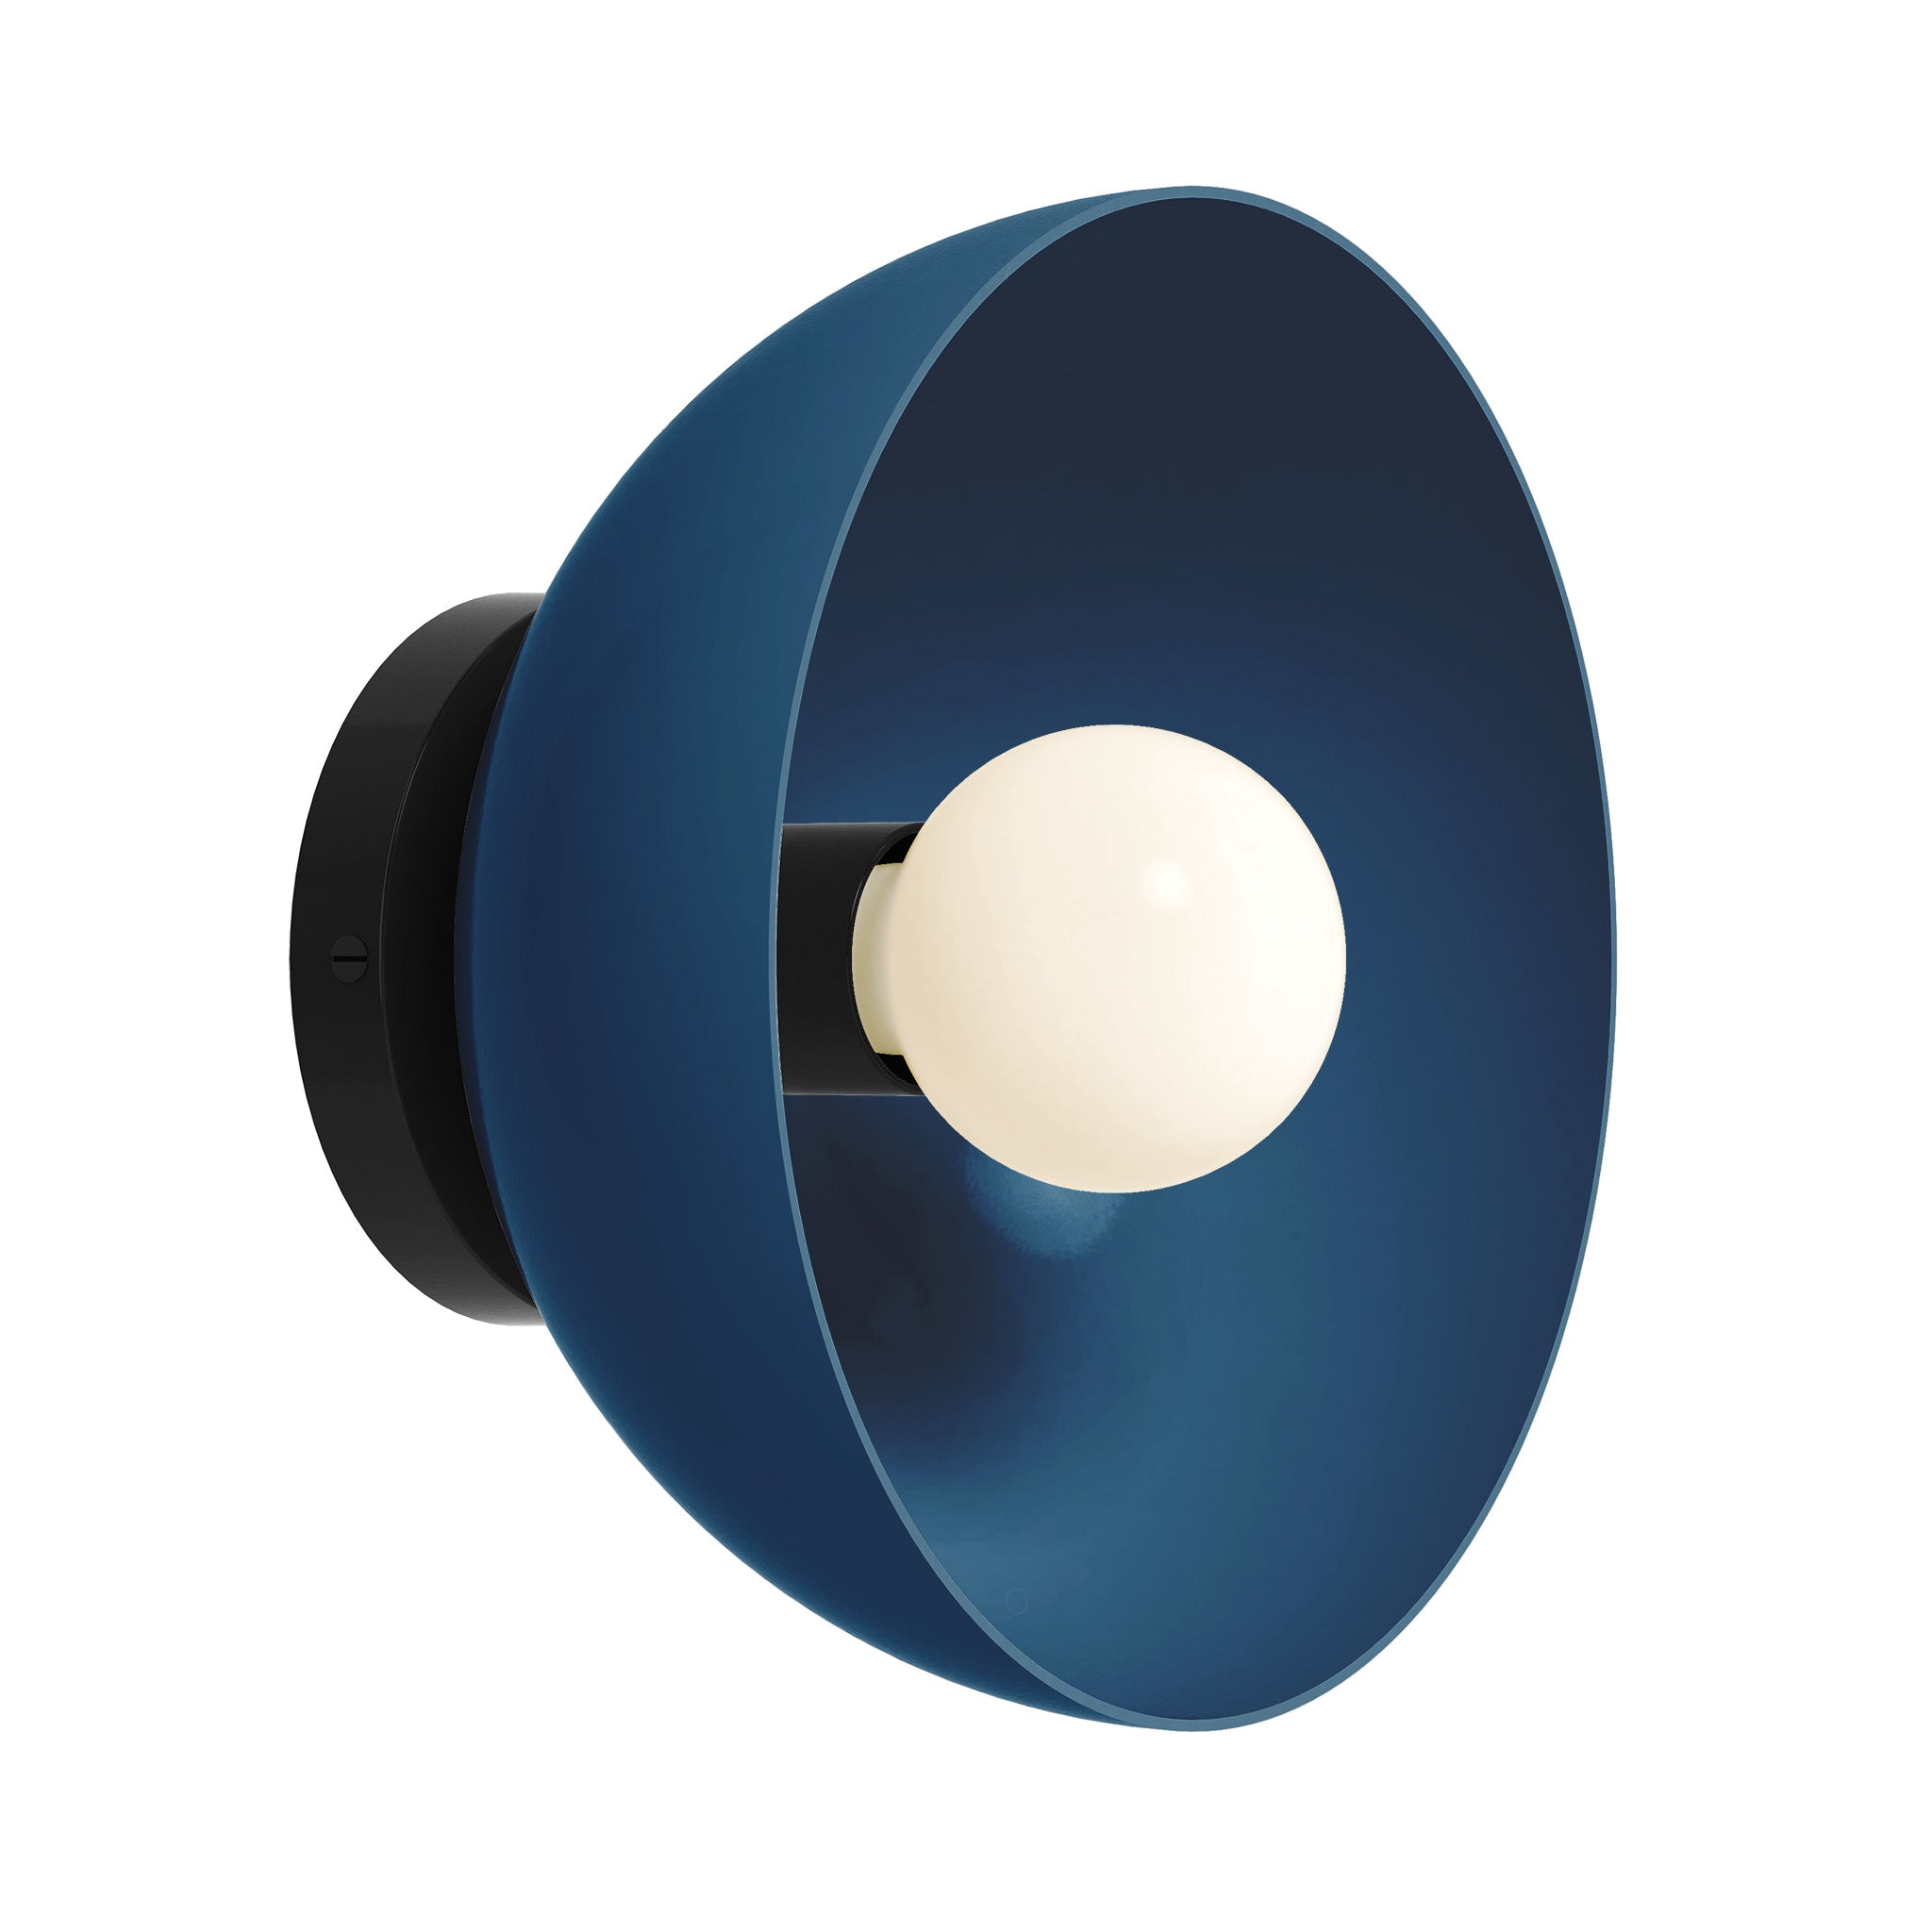 Black and slate blue color hemi dome sconce 10" Dutton Brown lighting